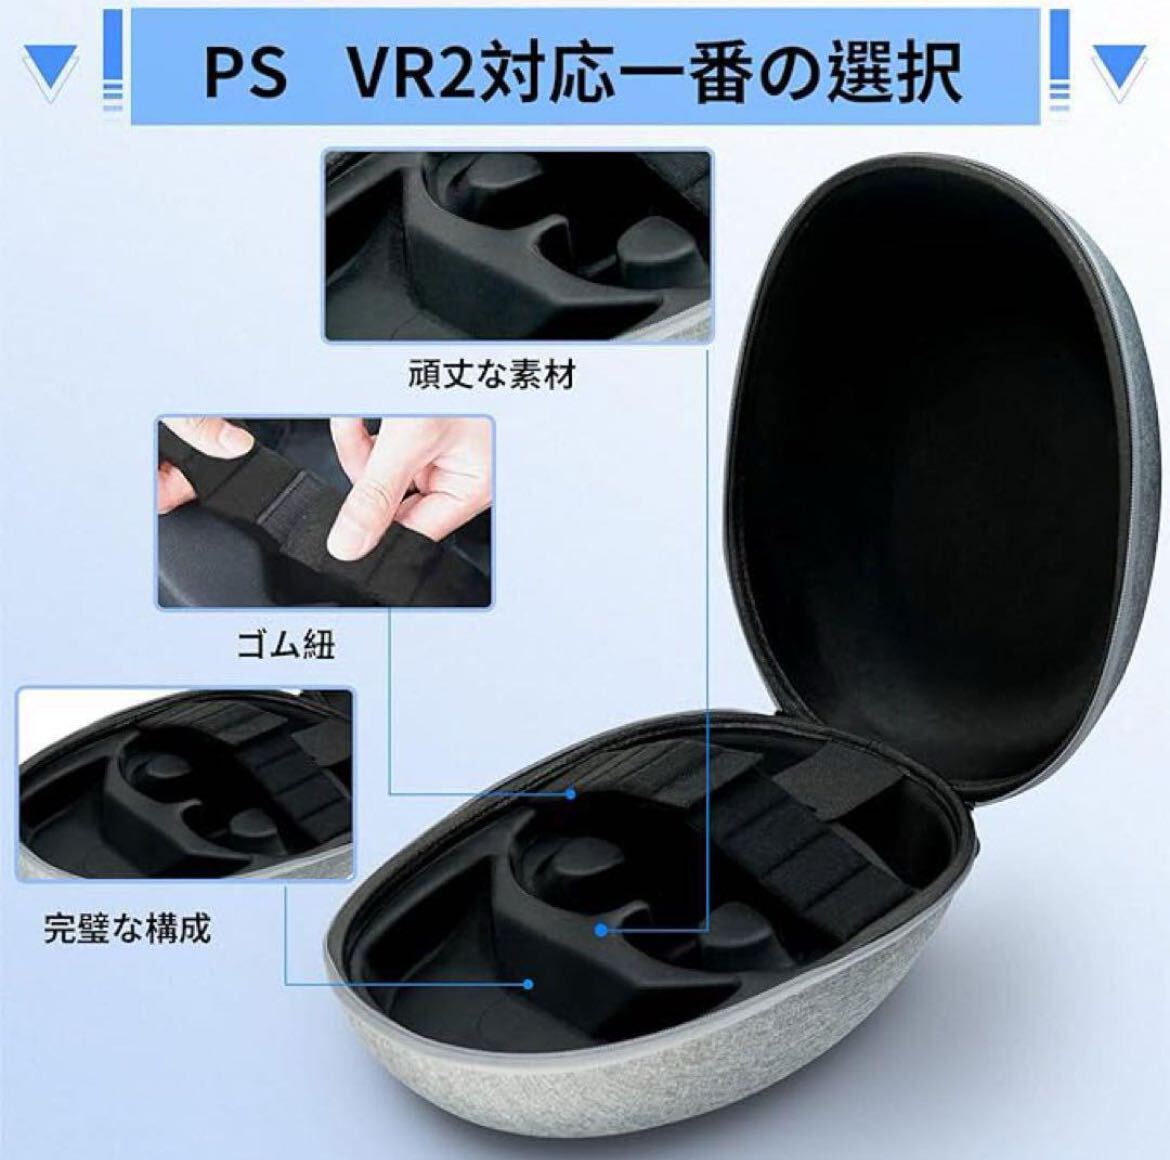 For PS VR2 収納バッグ 保護カバー キャリングバッグ 収納ケース 多機能対応 Play*Station VRデバイス収納 PS VR2対応 キャリーケース